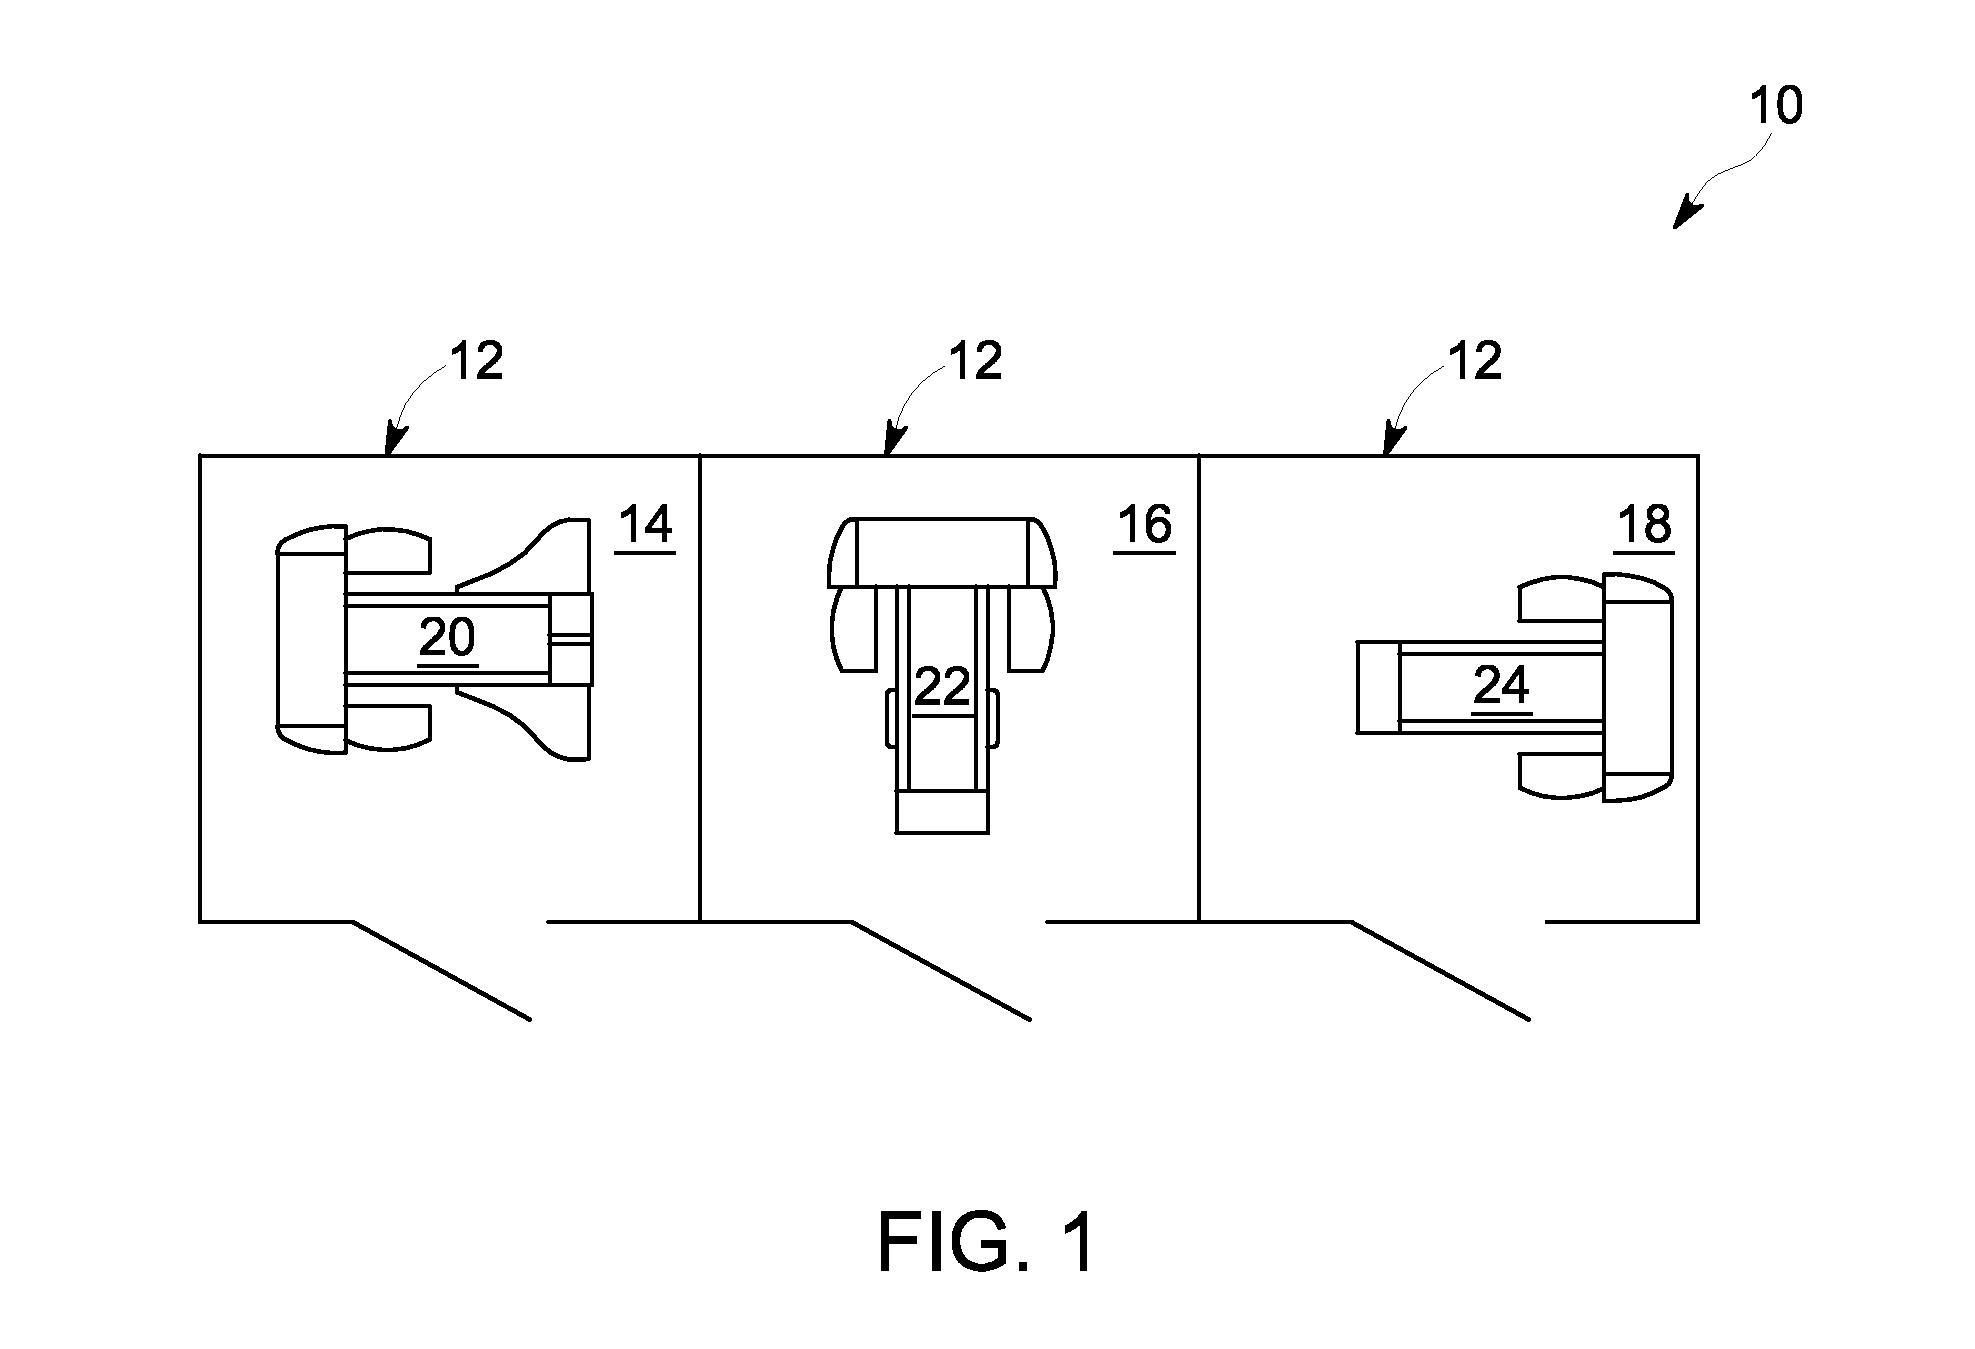 System, method and facility optimized for increasing patient throughput and scan efficiency